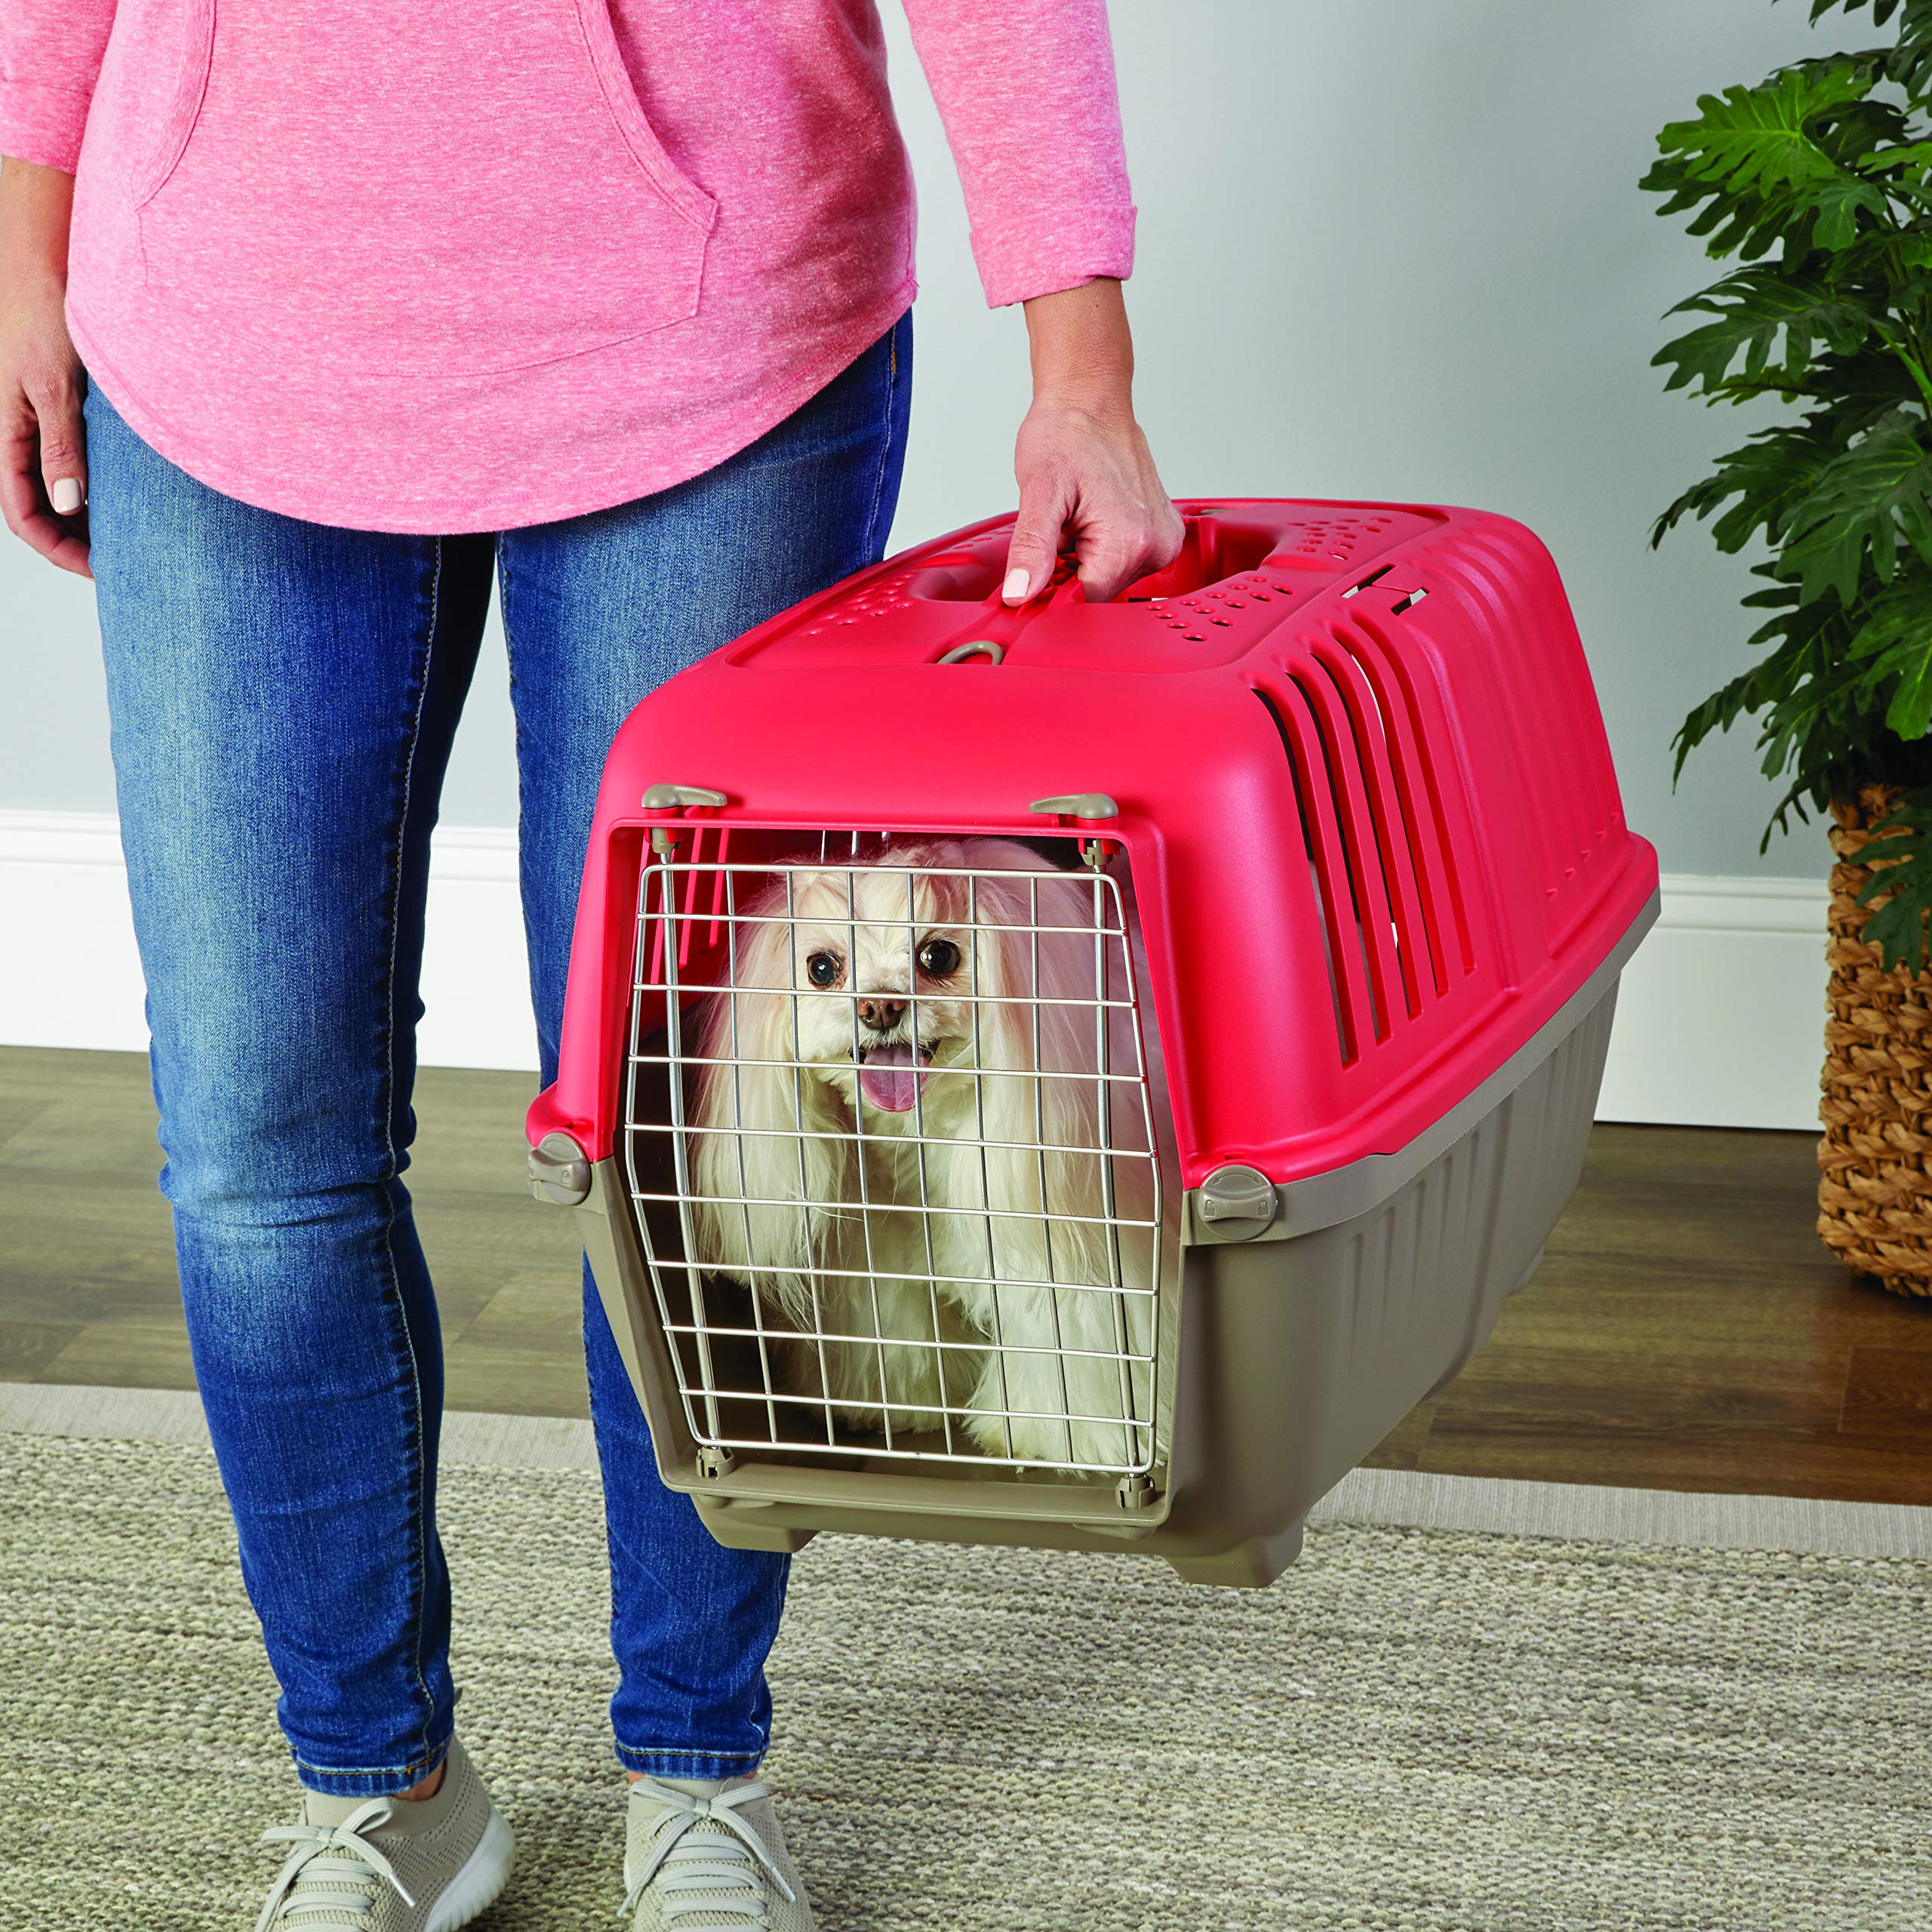 Midwest Spree Hard-Sided Travel Cat and Dog Kennel Carrier - Red - 24" X 15.5" X 15" Inches  